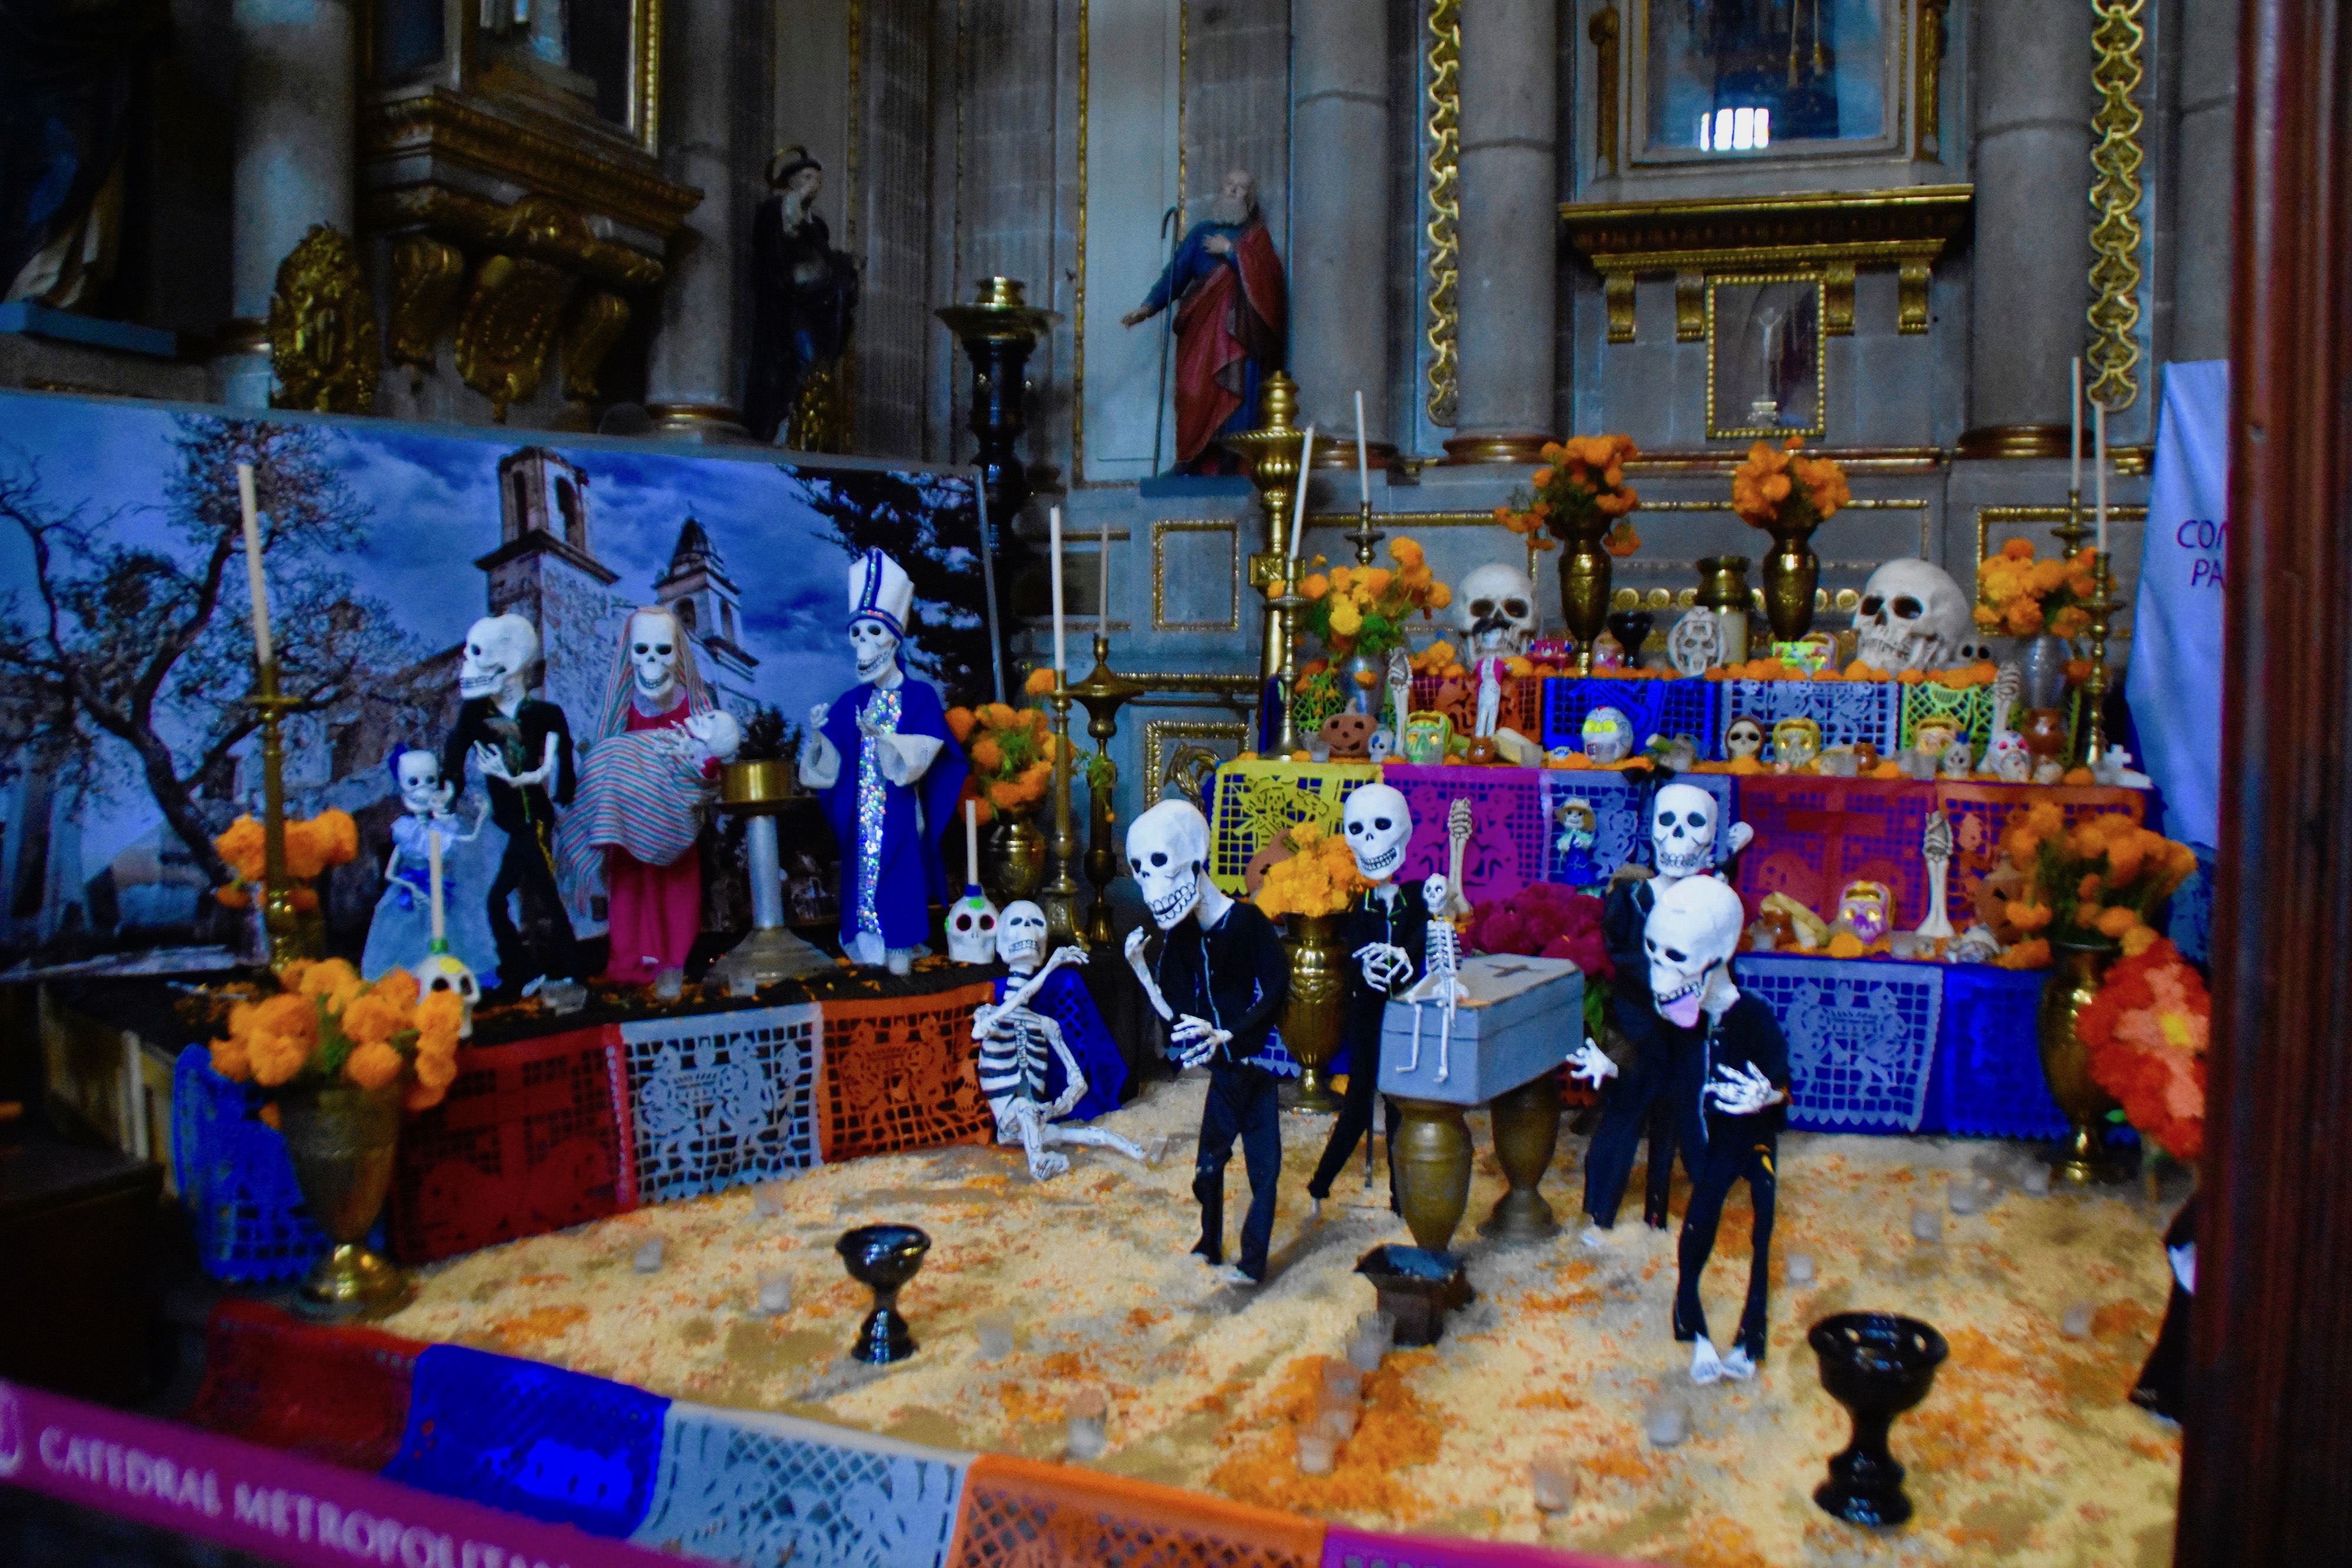 Cathedral Muertes Altar, Mexico City, Central Mexico